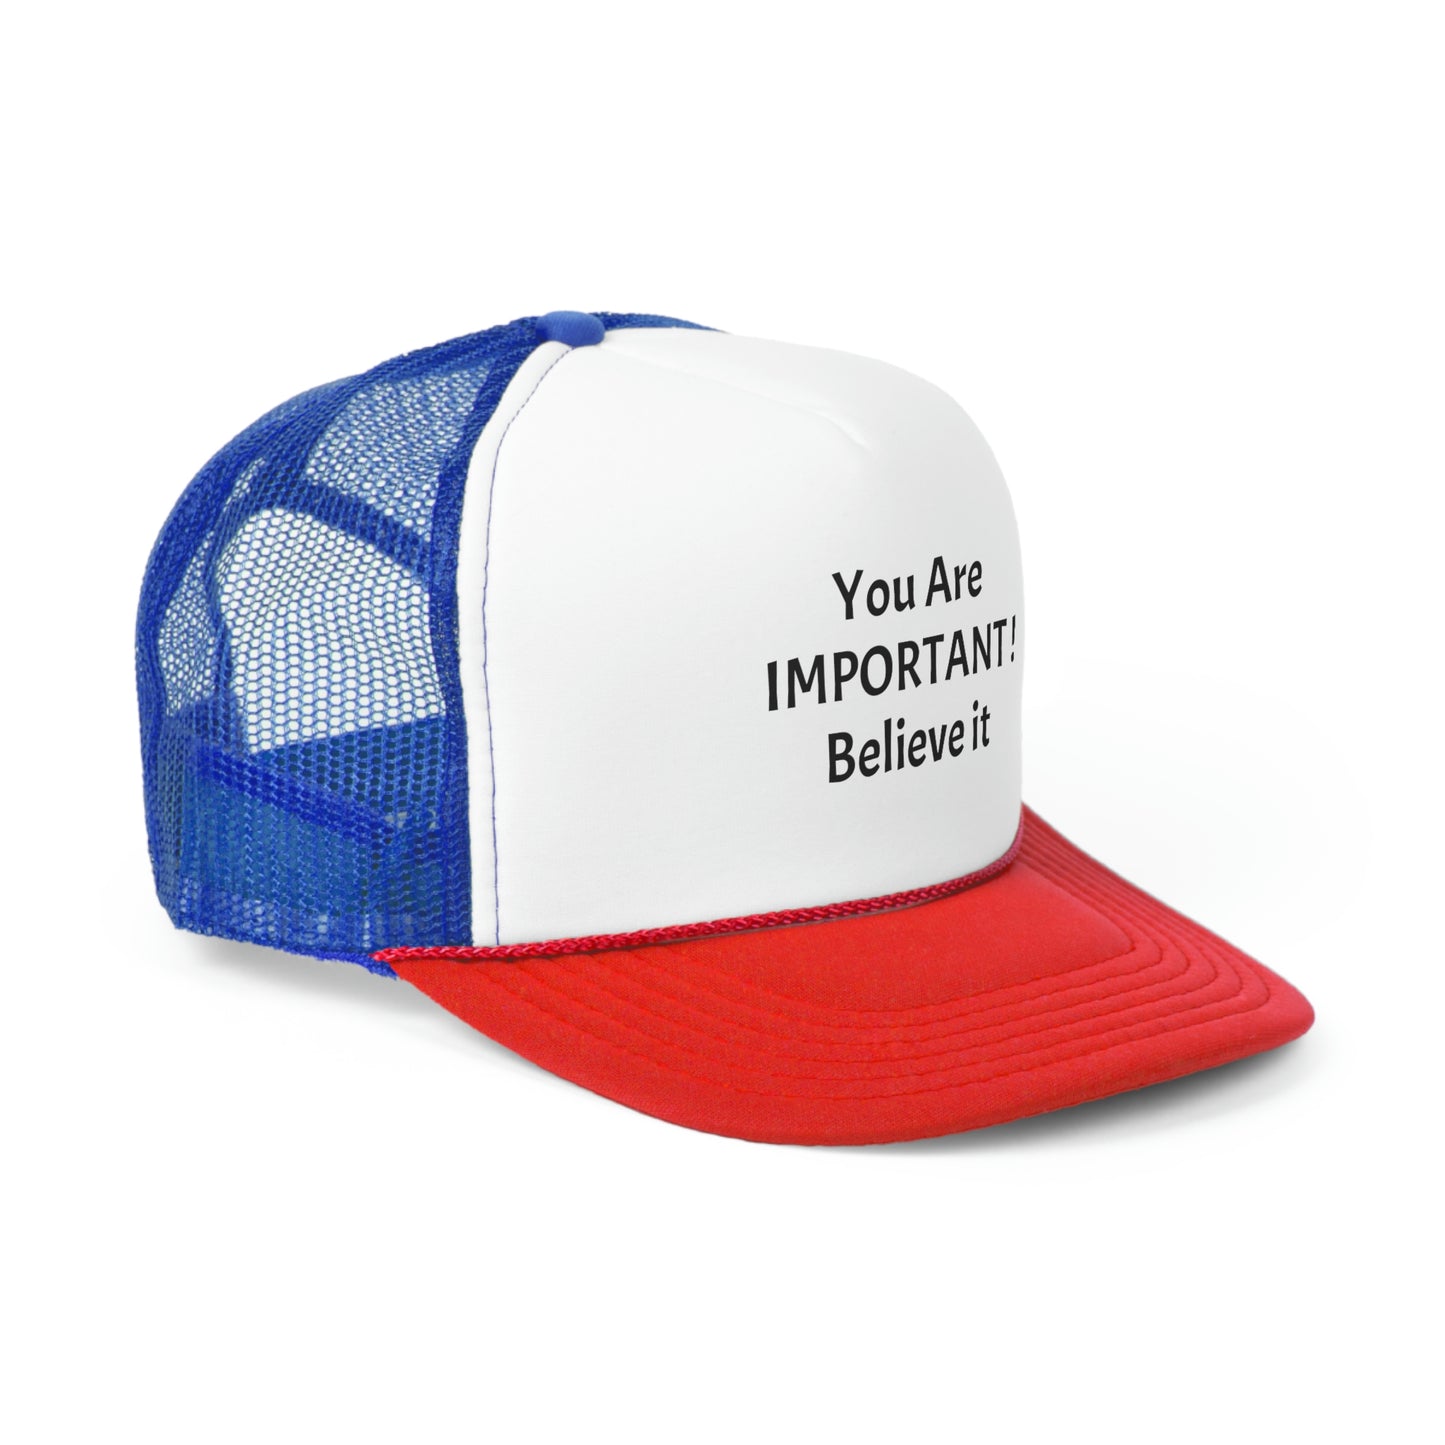 You Are Important! Trucker Caps